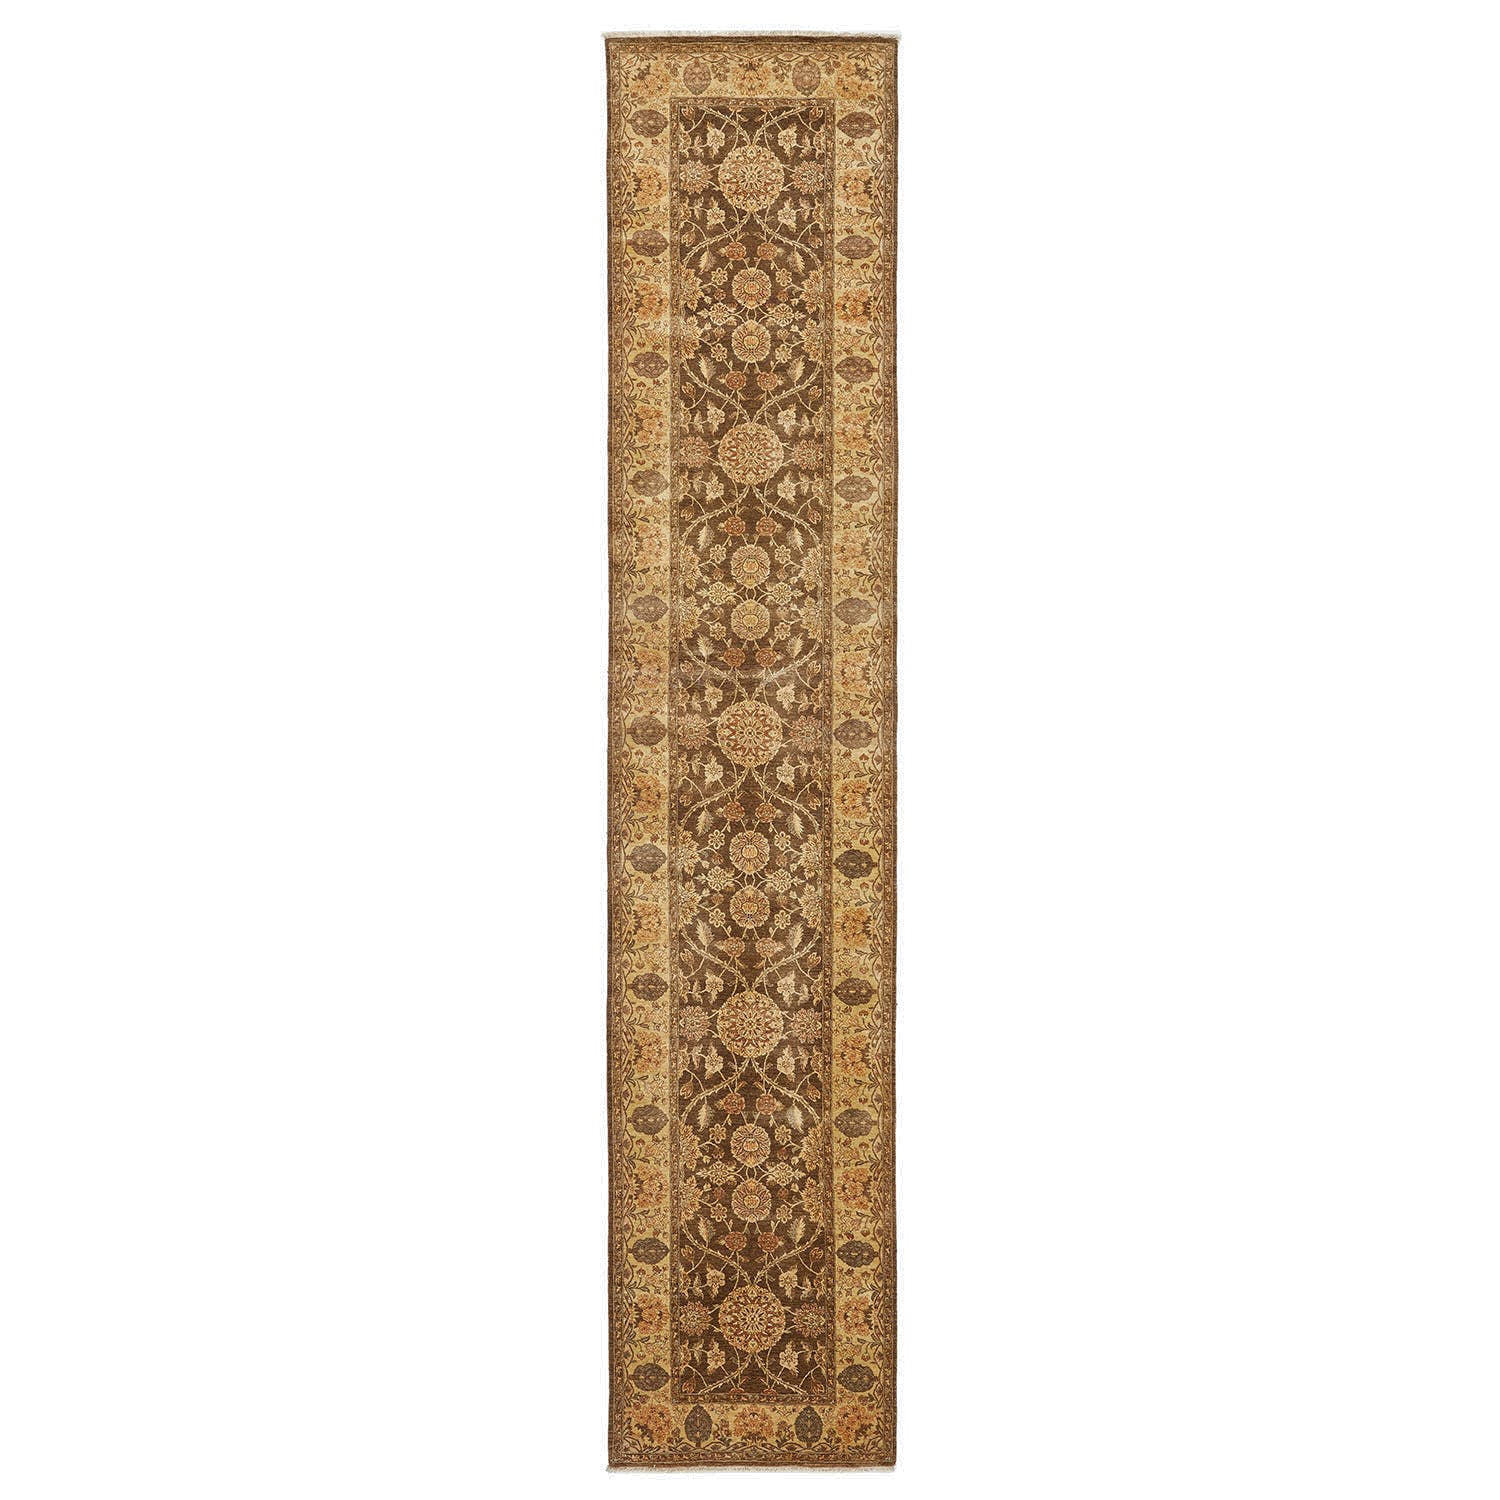 Traditional Runner Rug - 4'x19'10" Default Title